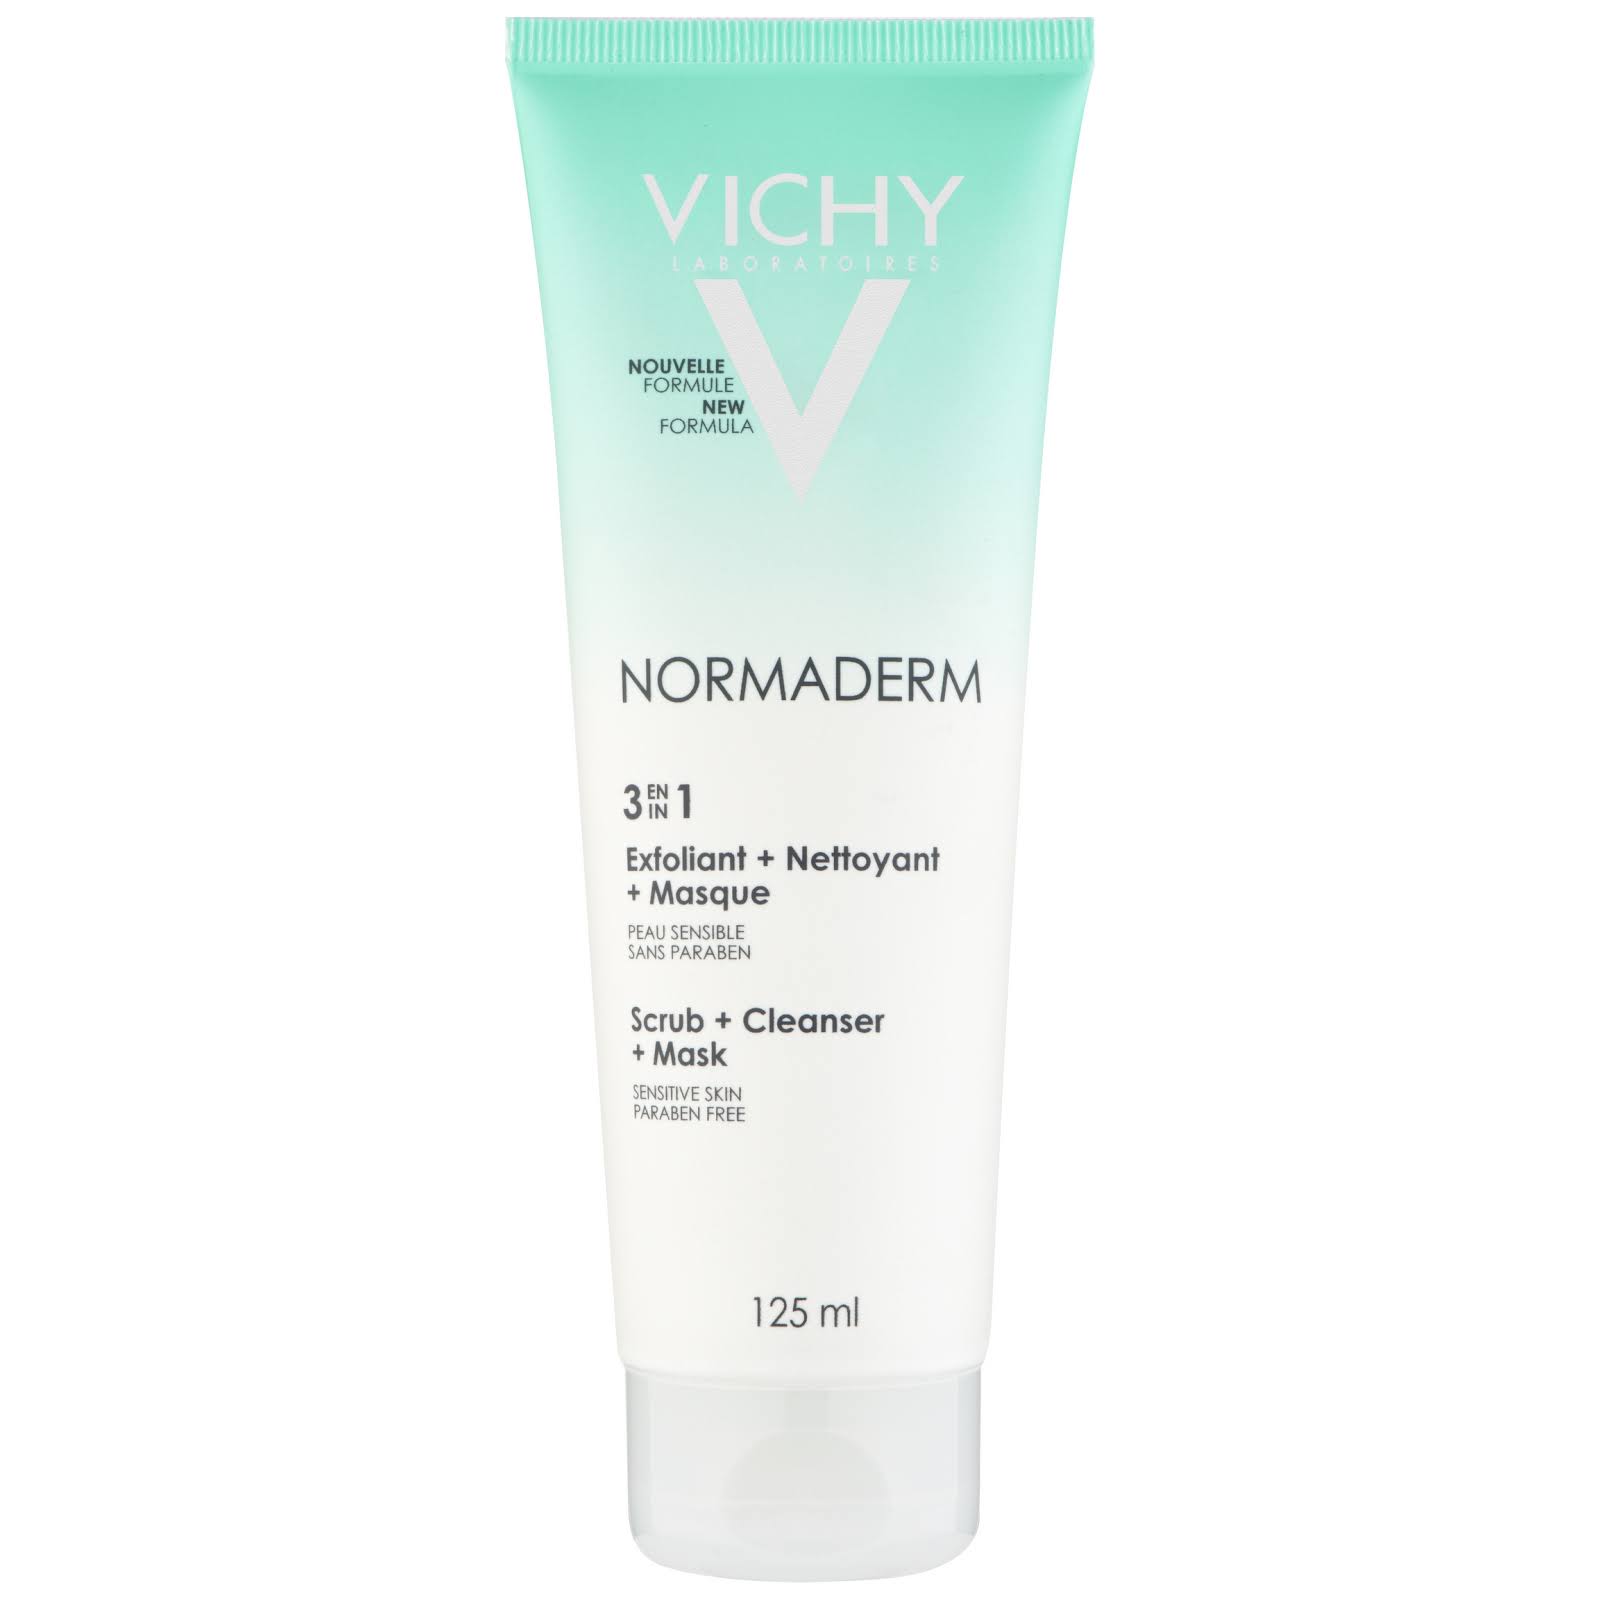 Vichy Normaderm 3in1 Scrub, Cleanser and Mask - 125ml